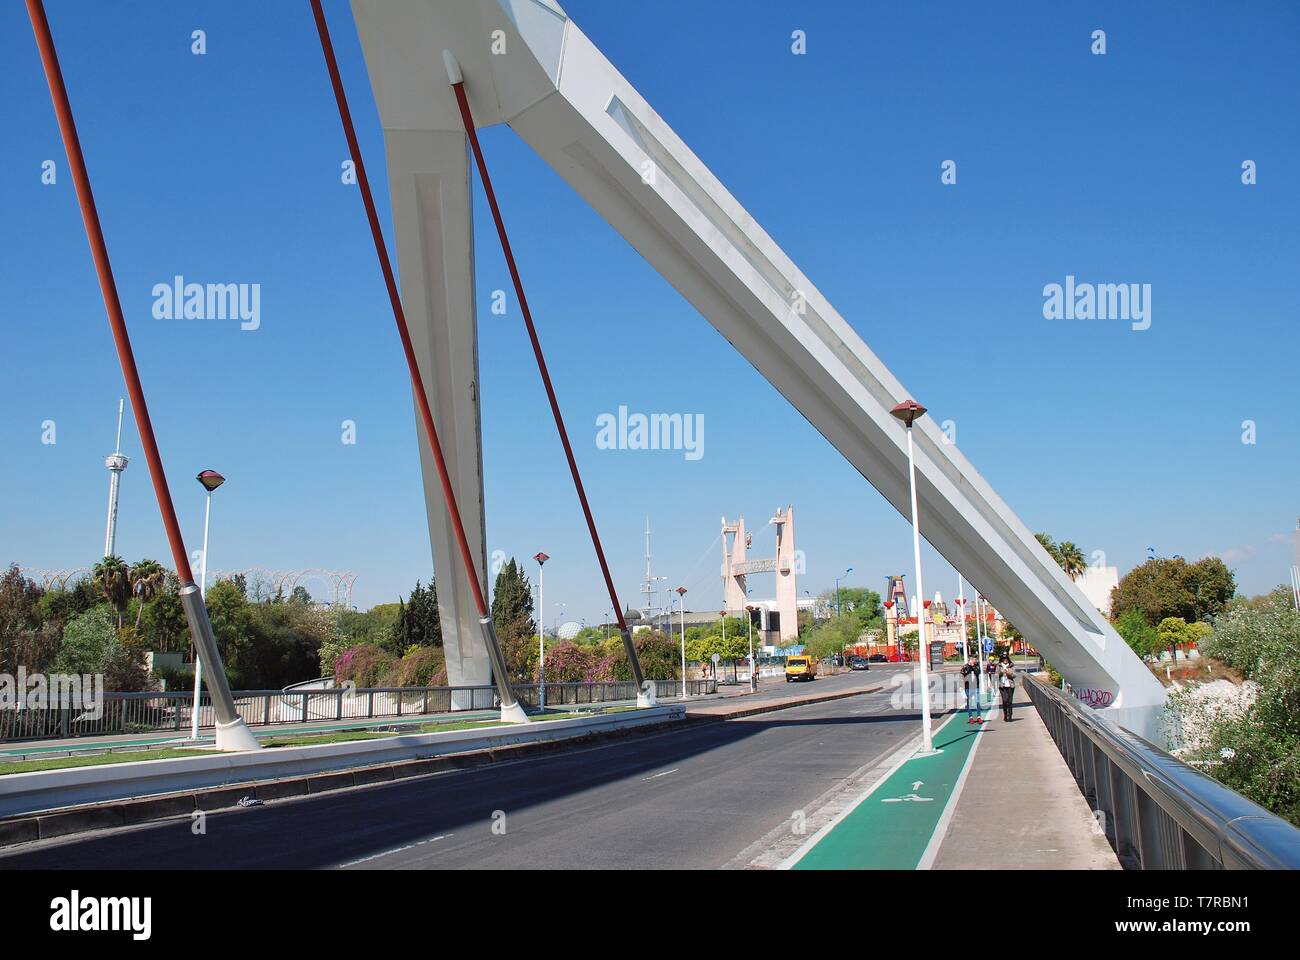 The Puente de la Barqueta in Seville, Spain on April 3, 2019. The suspension bridge was completed in 1992 for access to the Universal Exposition. Stock Photo